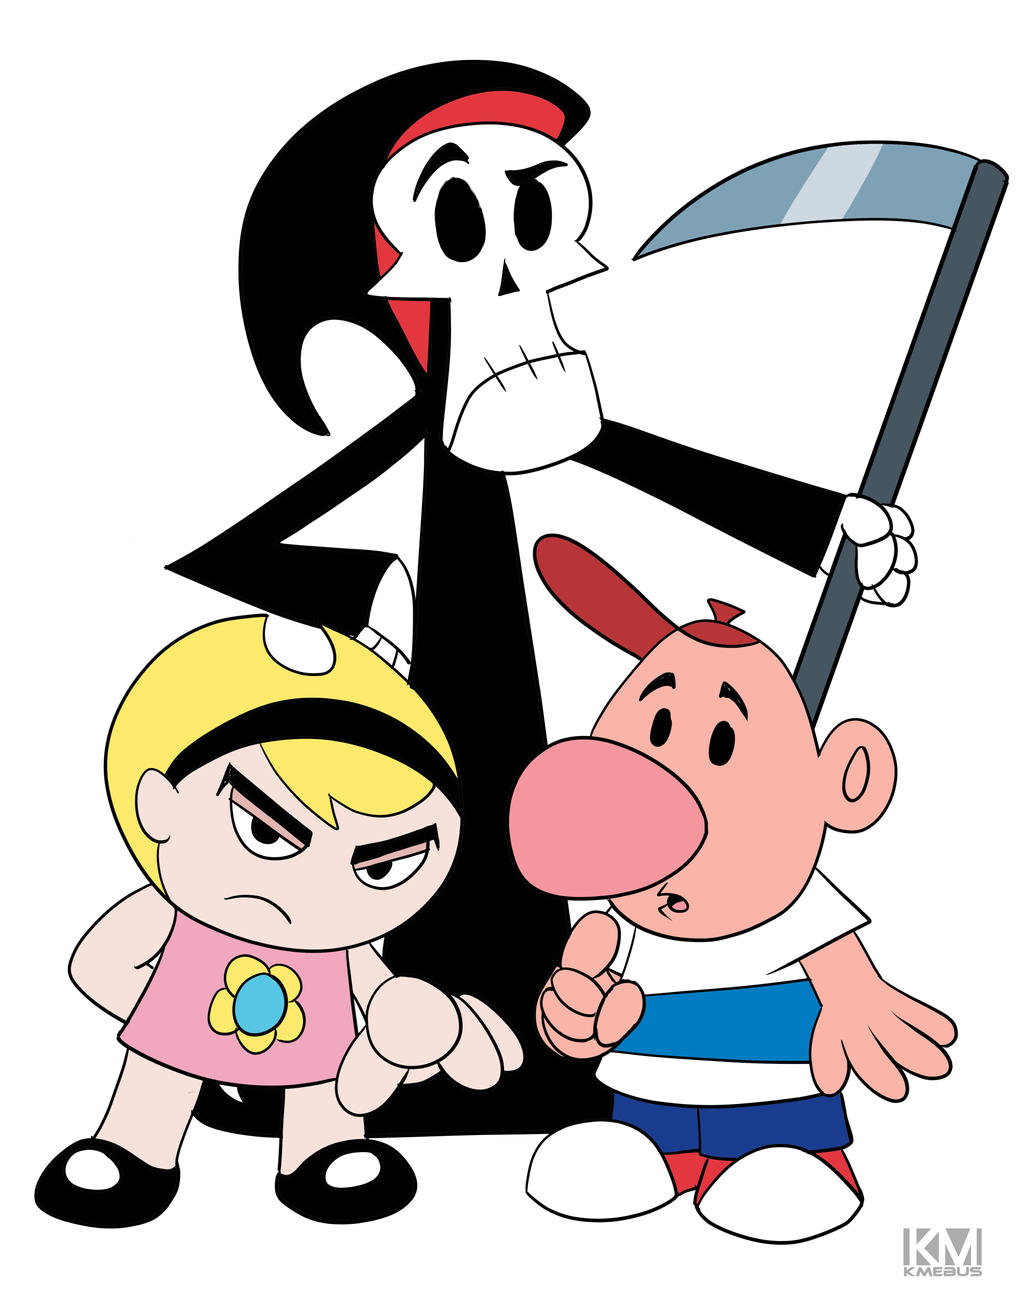 Assistir The Grim Adventures of Billy and Mandy - online